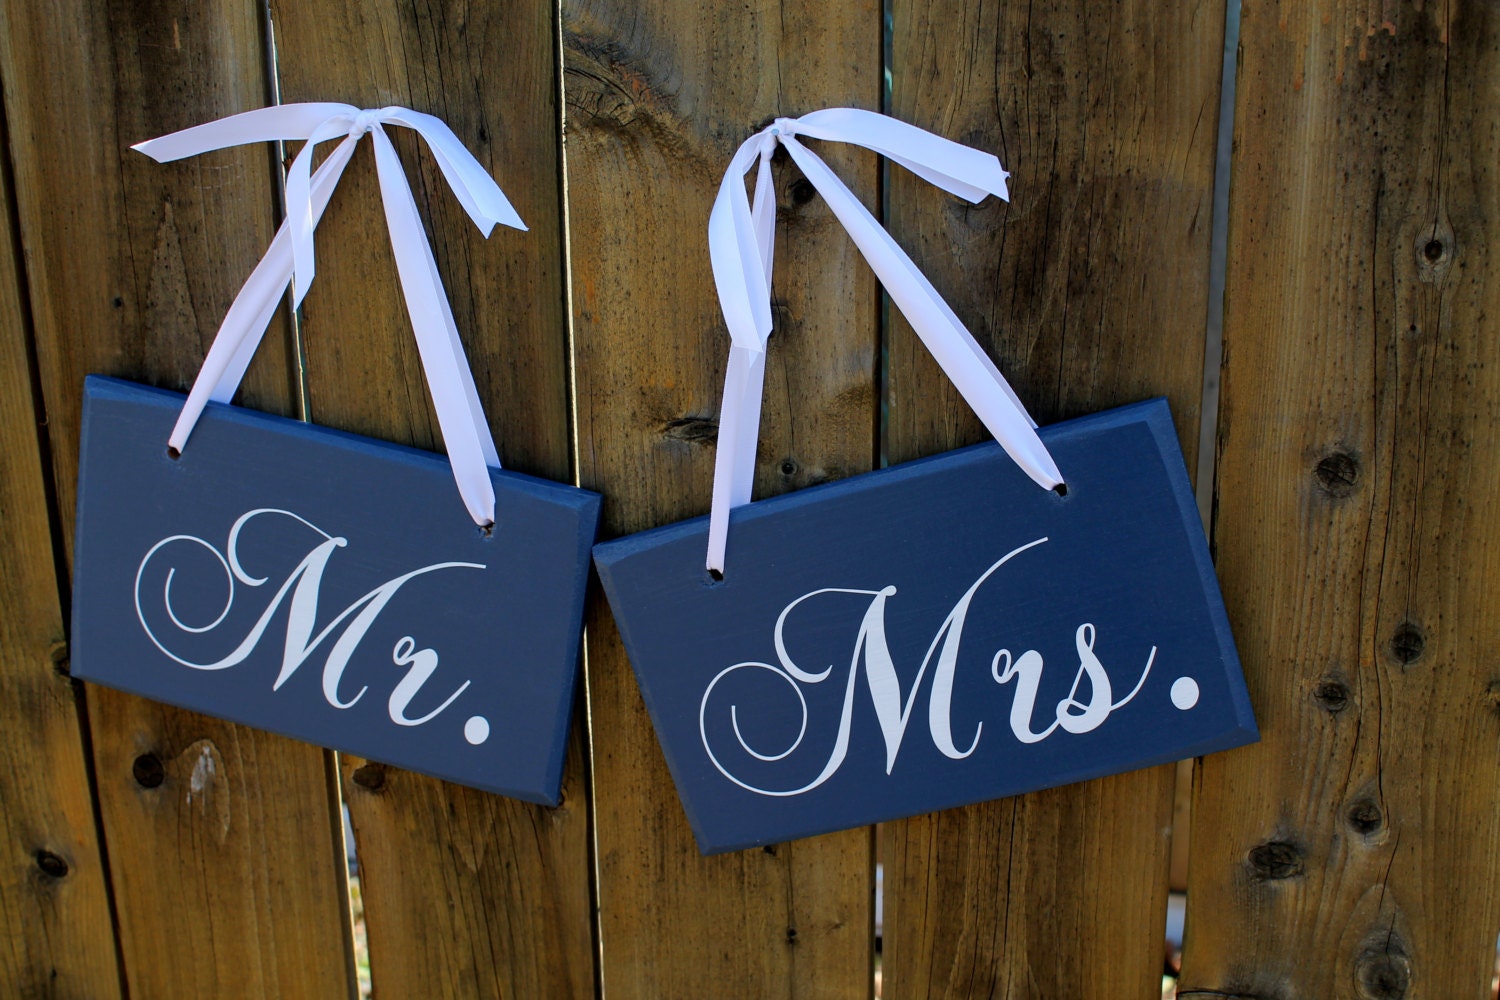 6 x 10 Wooden Wedding Sign: 2pc Set Double sided